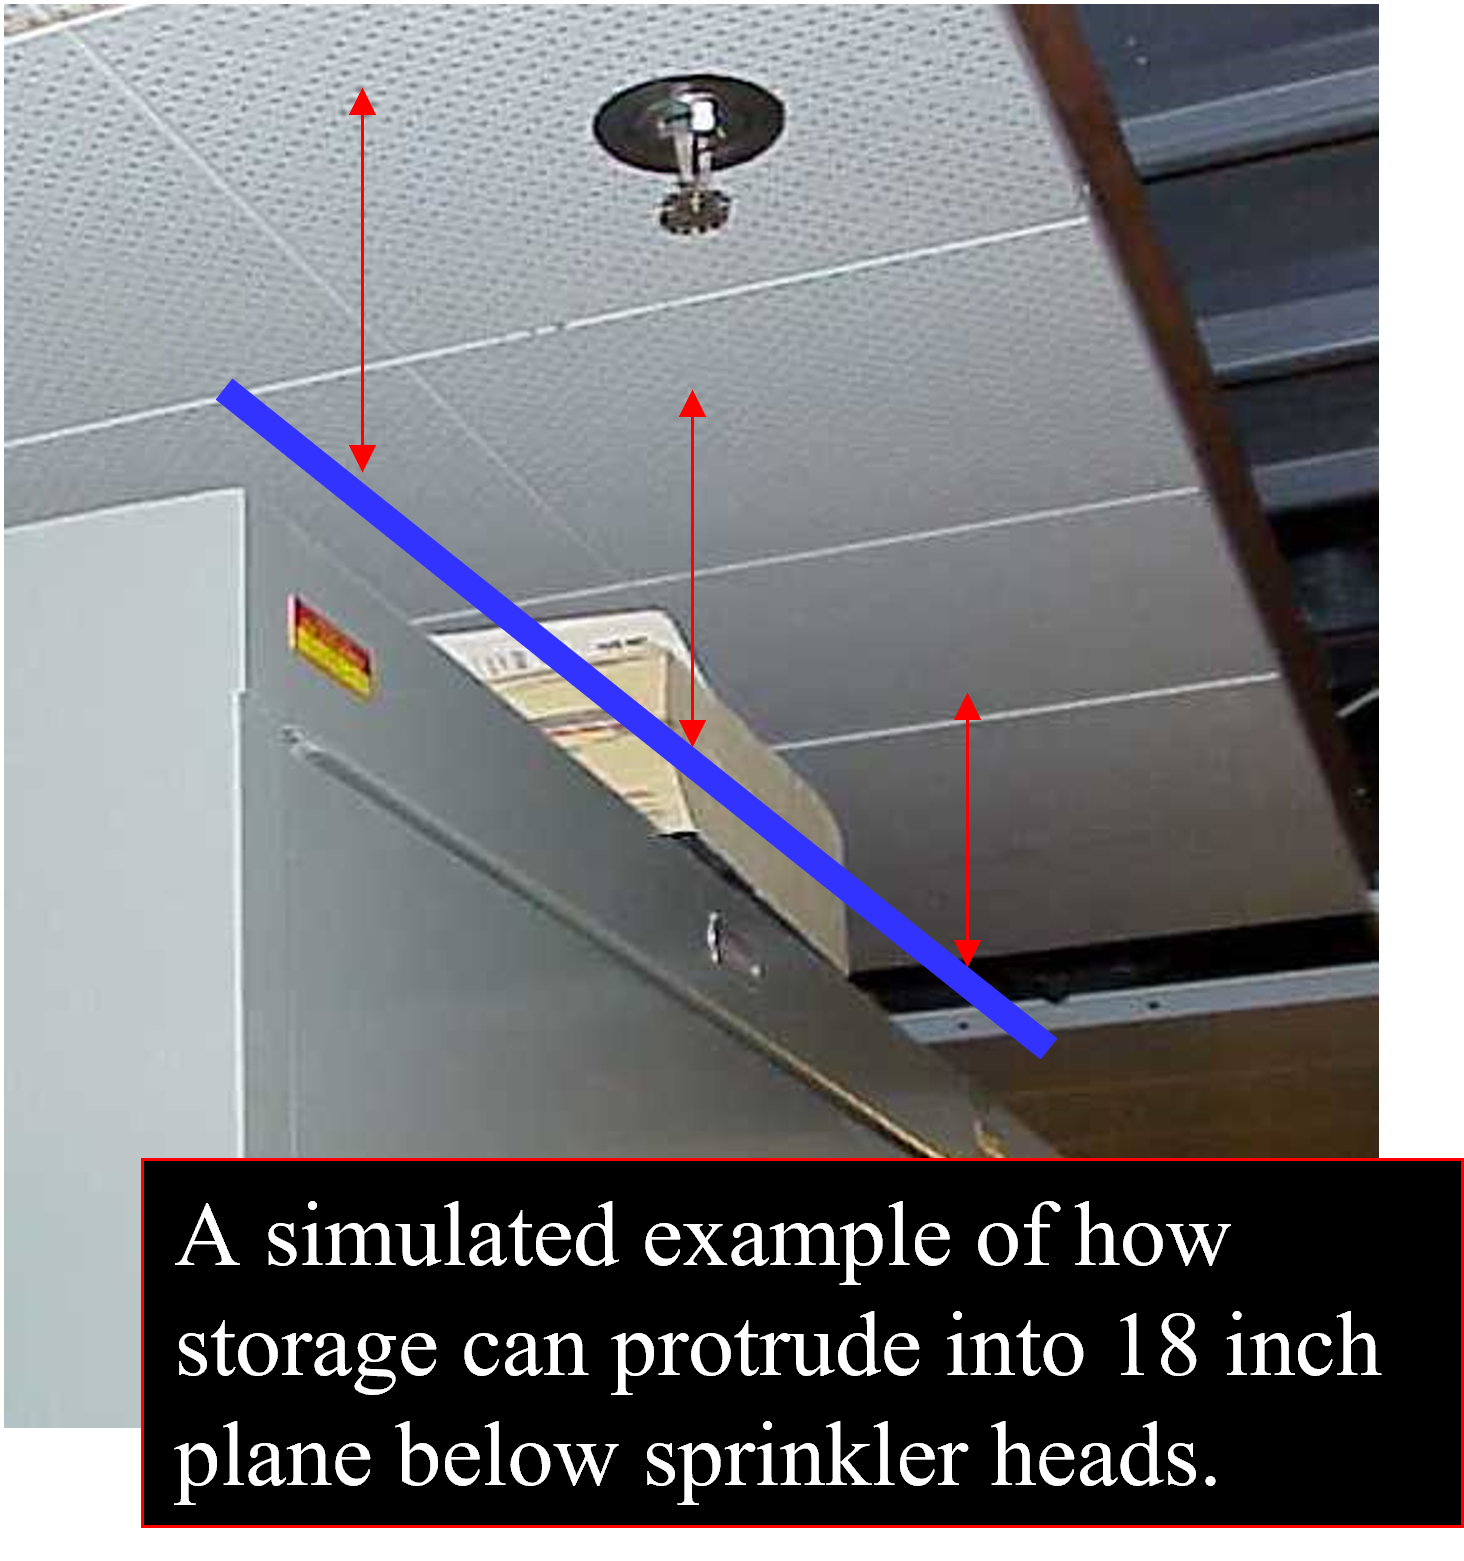 A simulated example of how storage can protrude into 18 inches plane below sprinkler heads